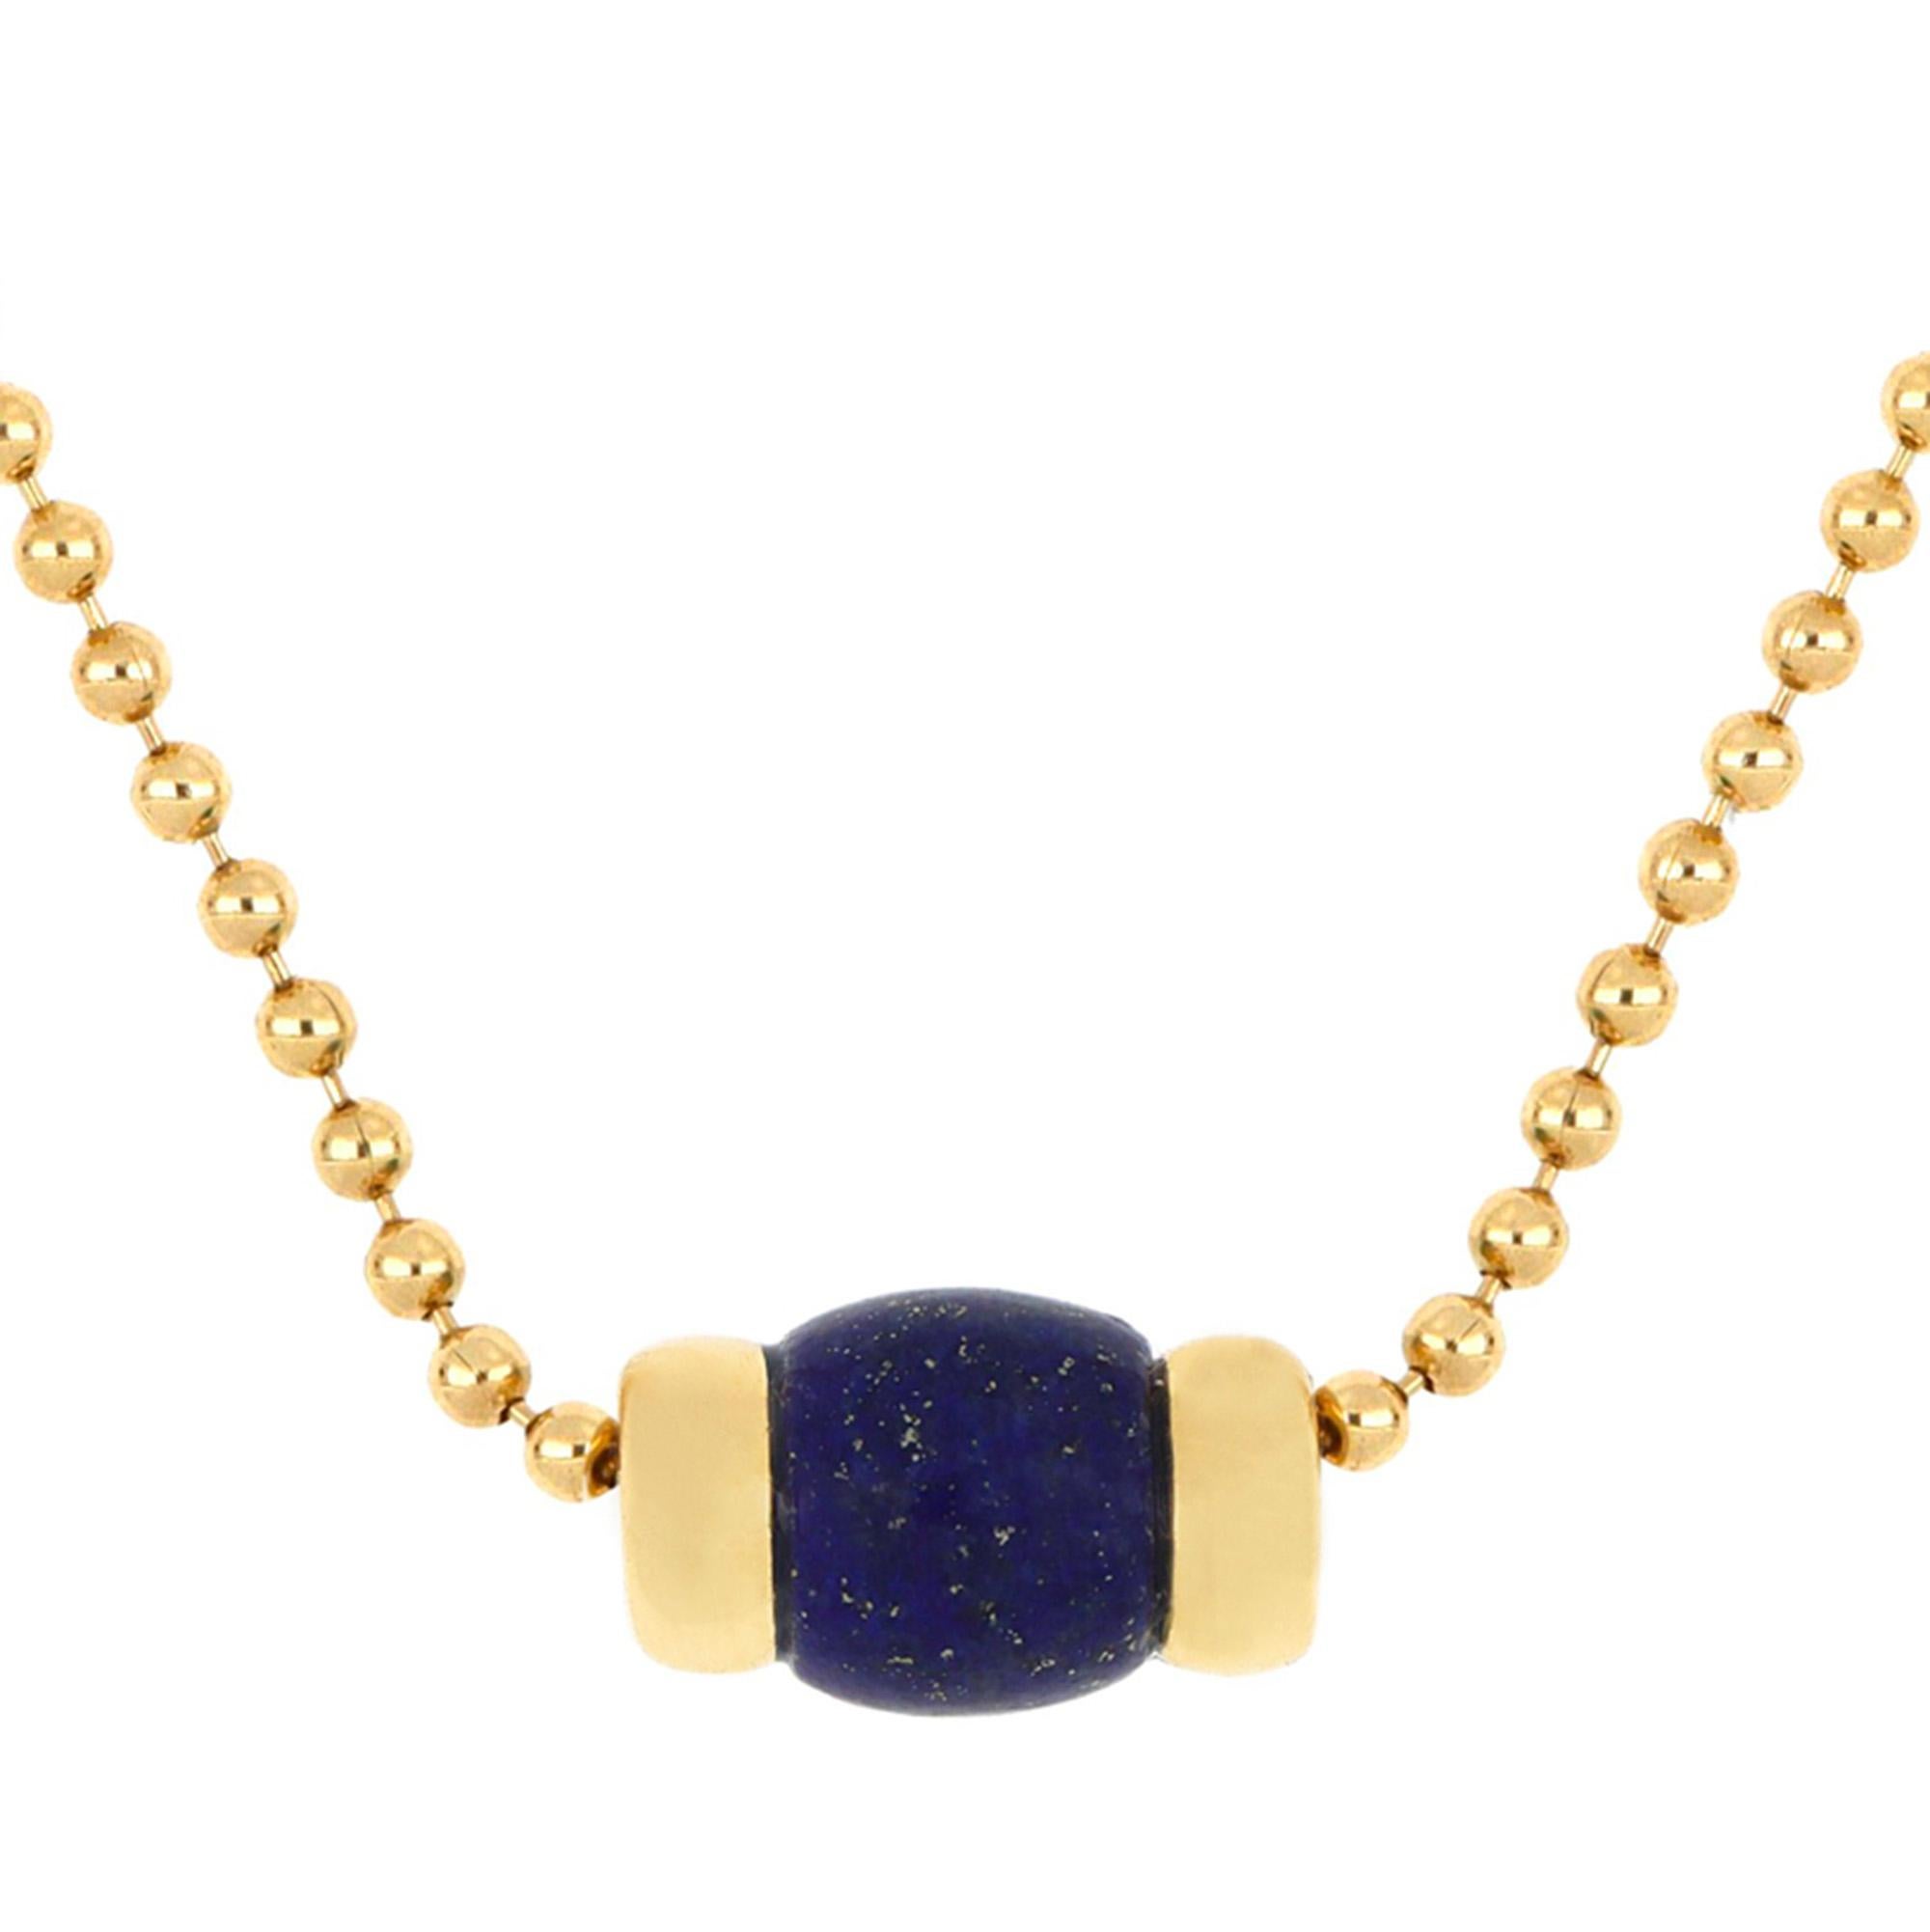 Avant-garde design, simple and linear volumes come together in this necklace from Le Carrousel collection. 18-karat yellow gold, combined with the deep blue of lapis lazuli, ennobles the three-dimensionality of the barrel-shaped centerpiece. Due to